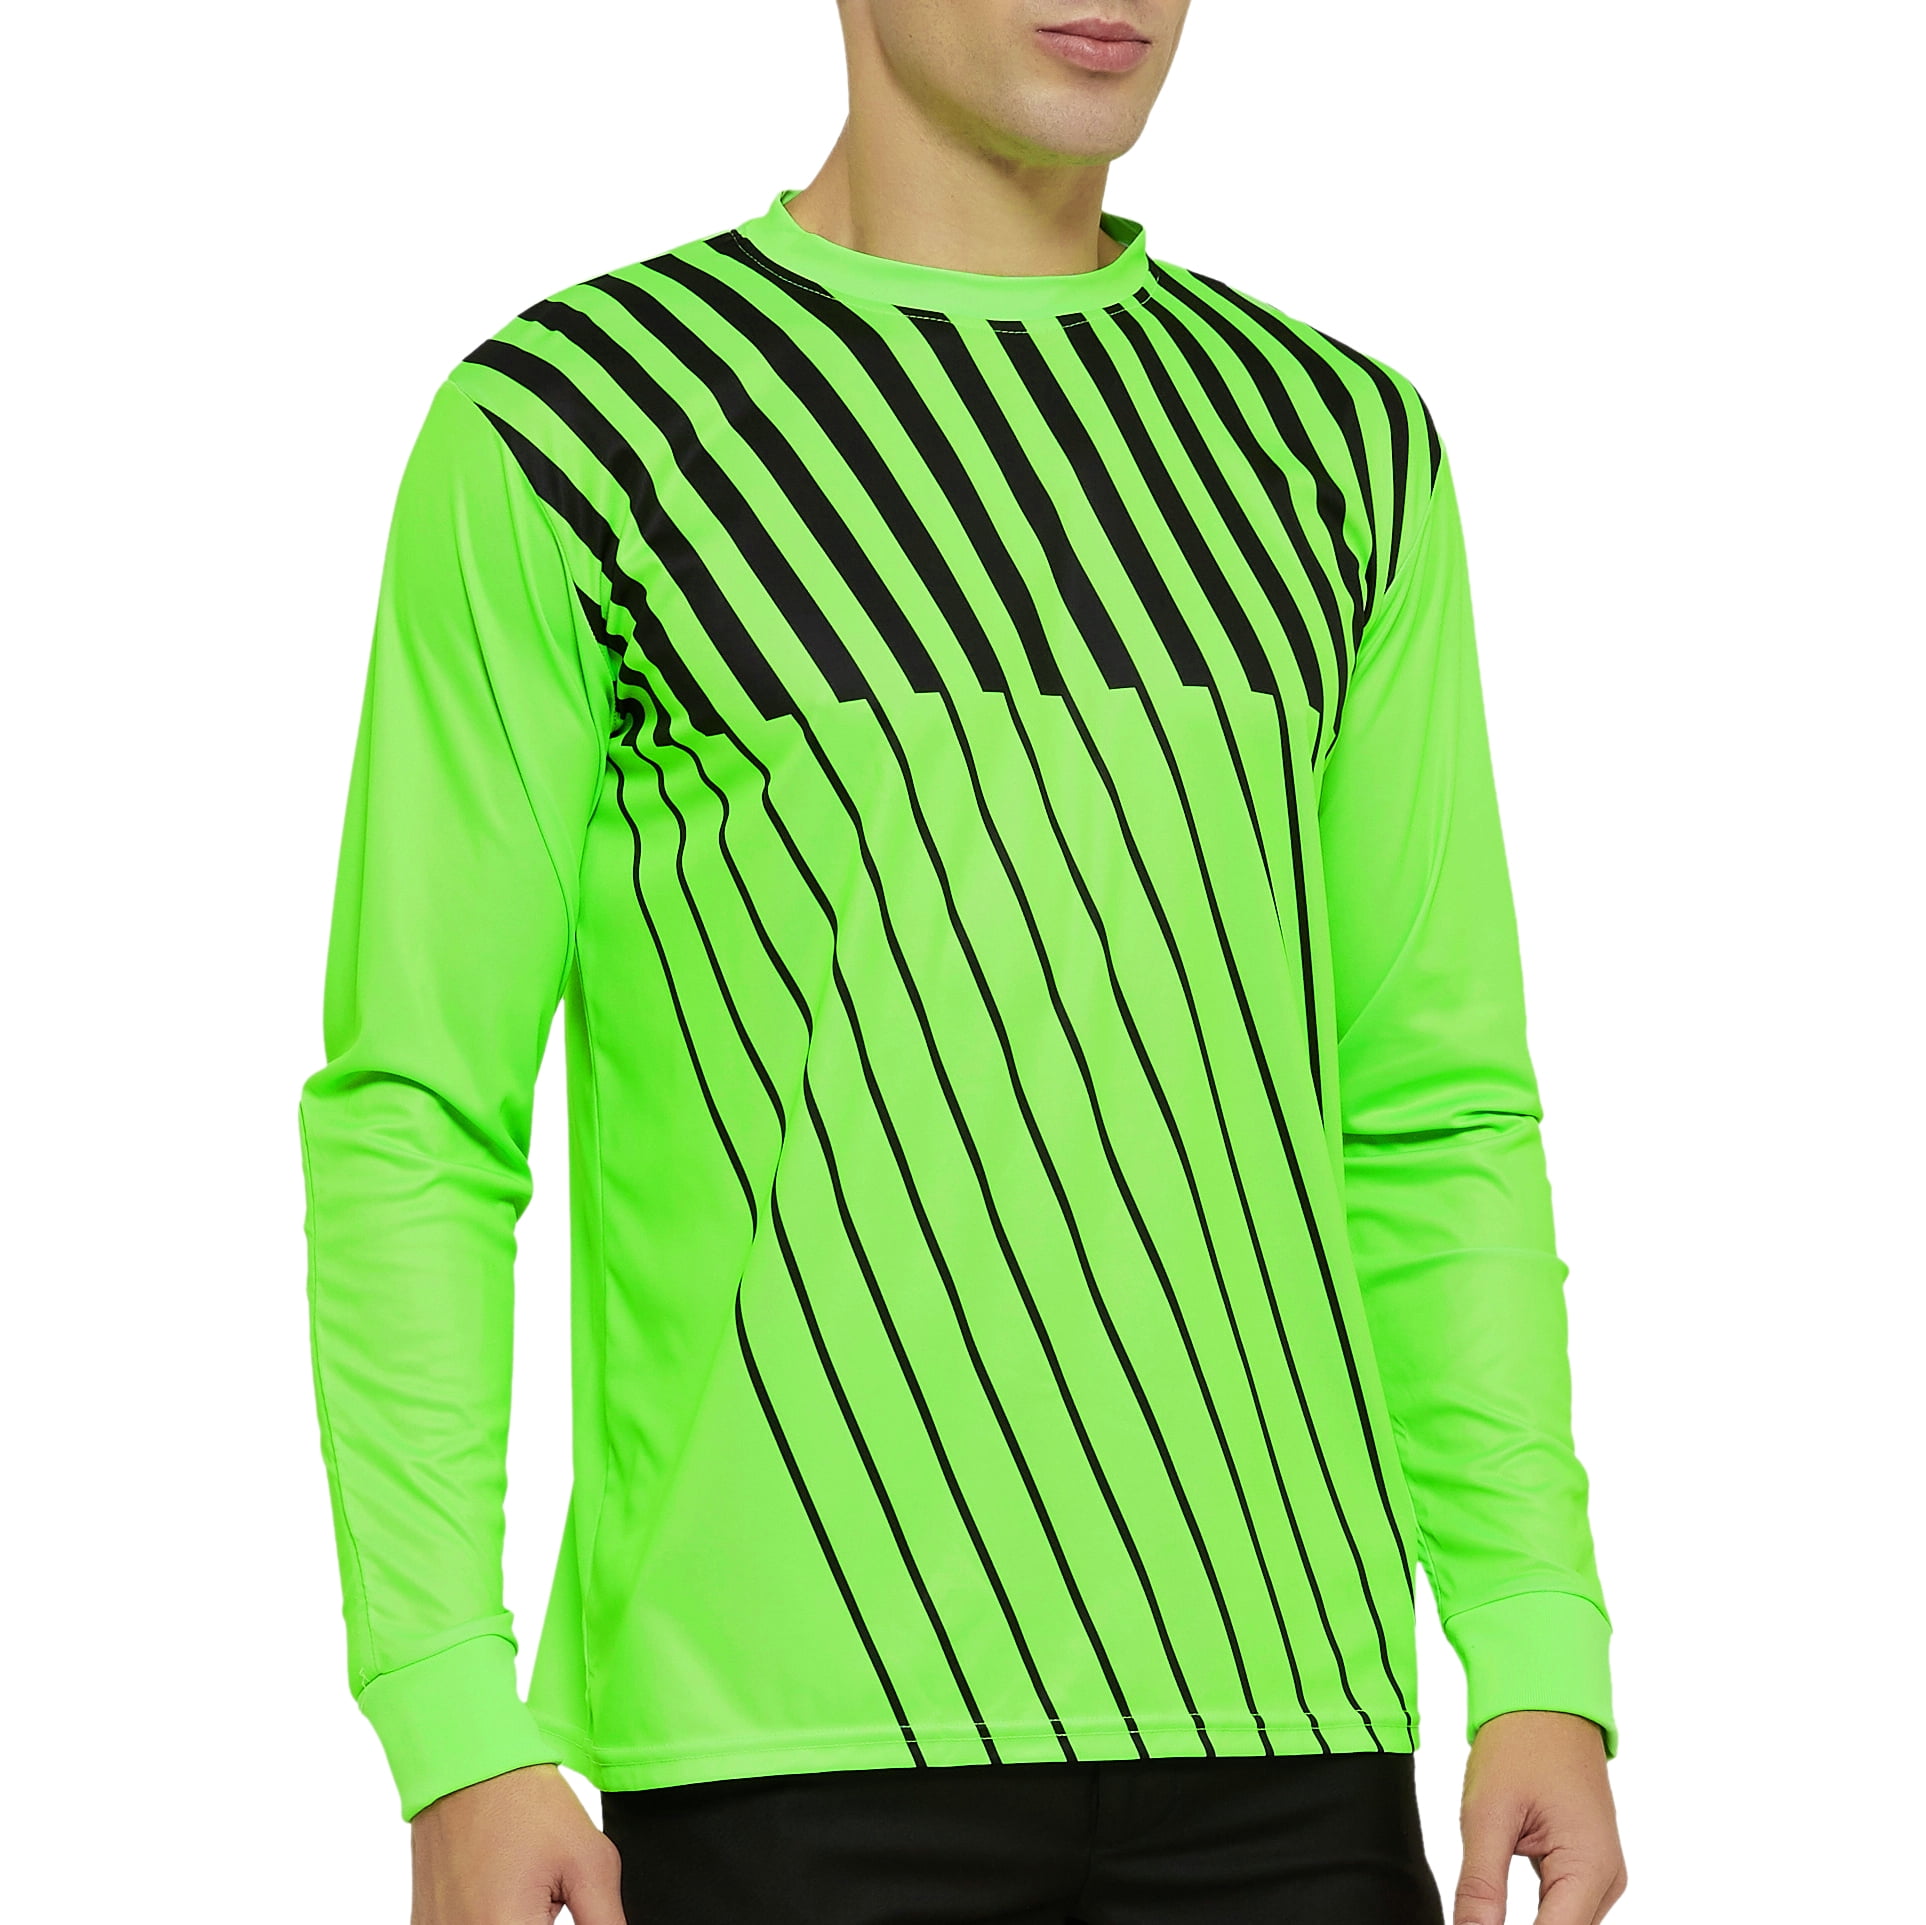 Activewear Football Soccer Goalkeeper Chest Padded Goalie Jersey Top Pants Suits 